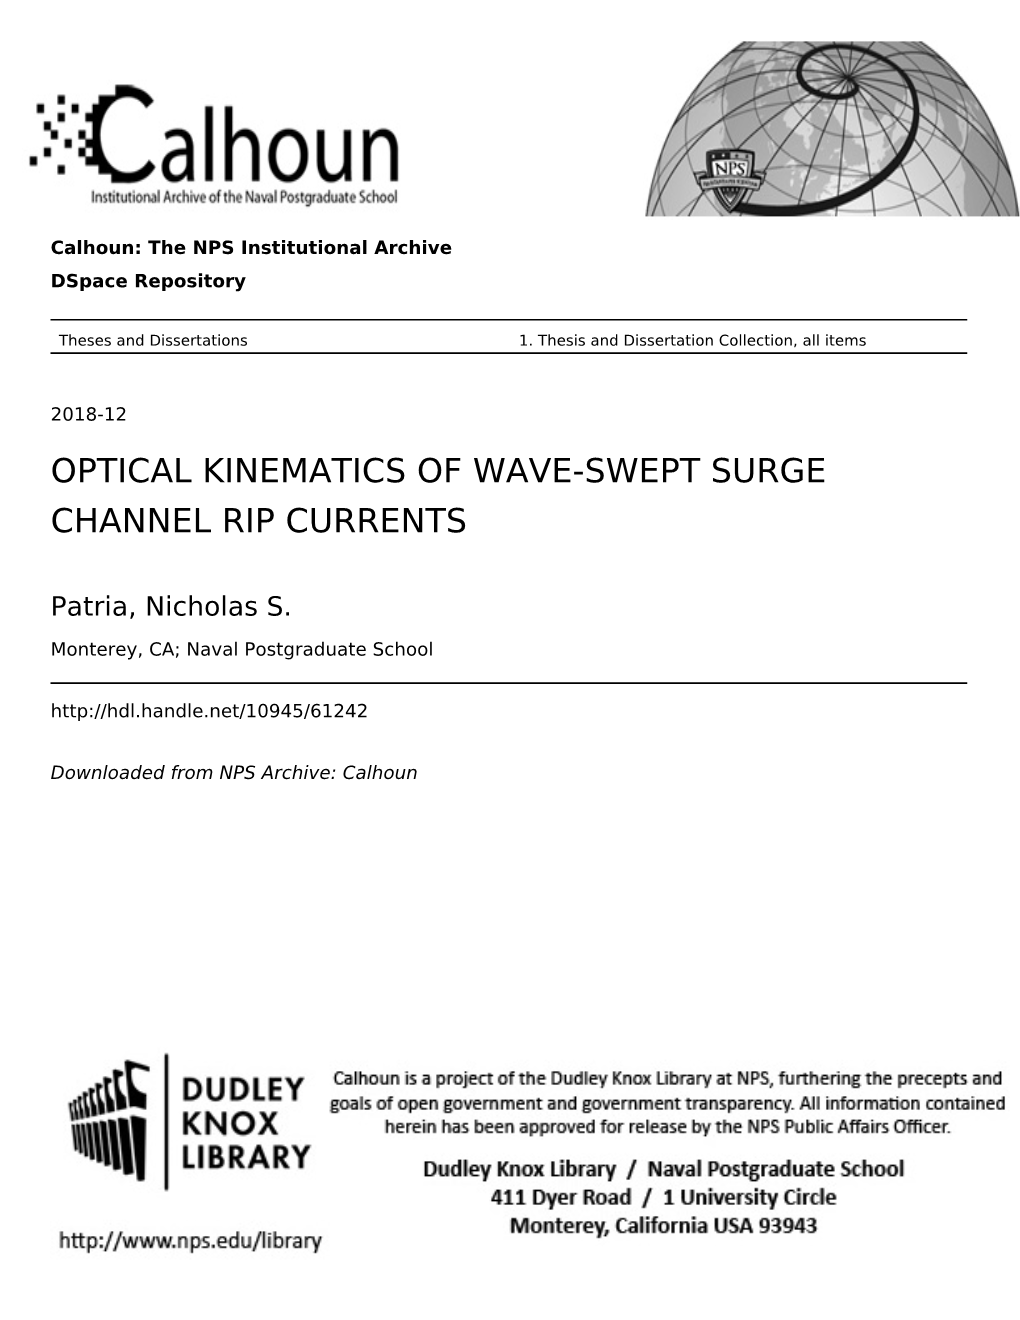 Optical Kinematics of Wave-Swept Surge Channel Rip Currents